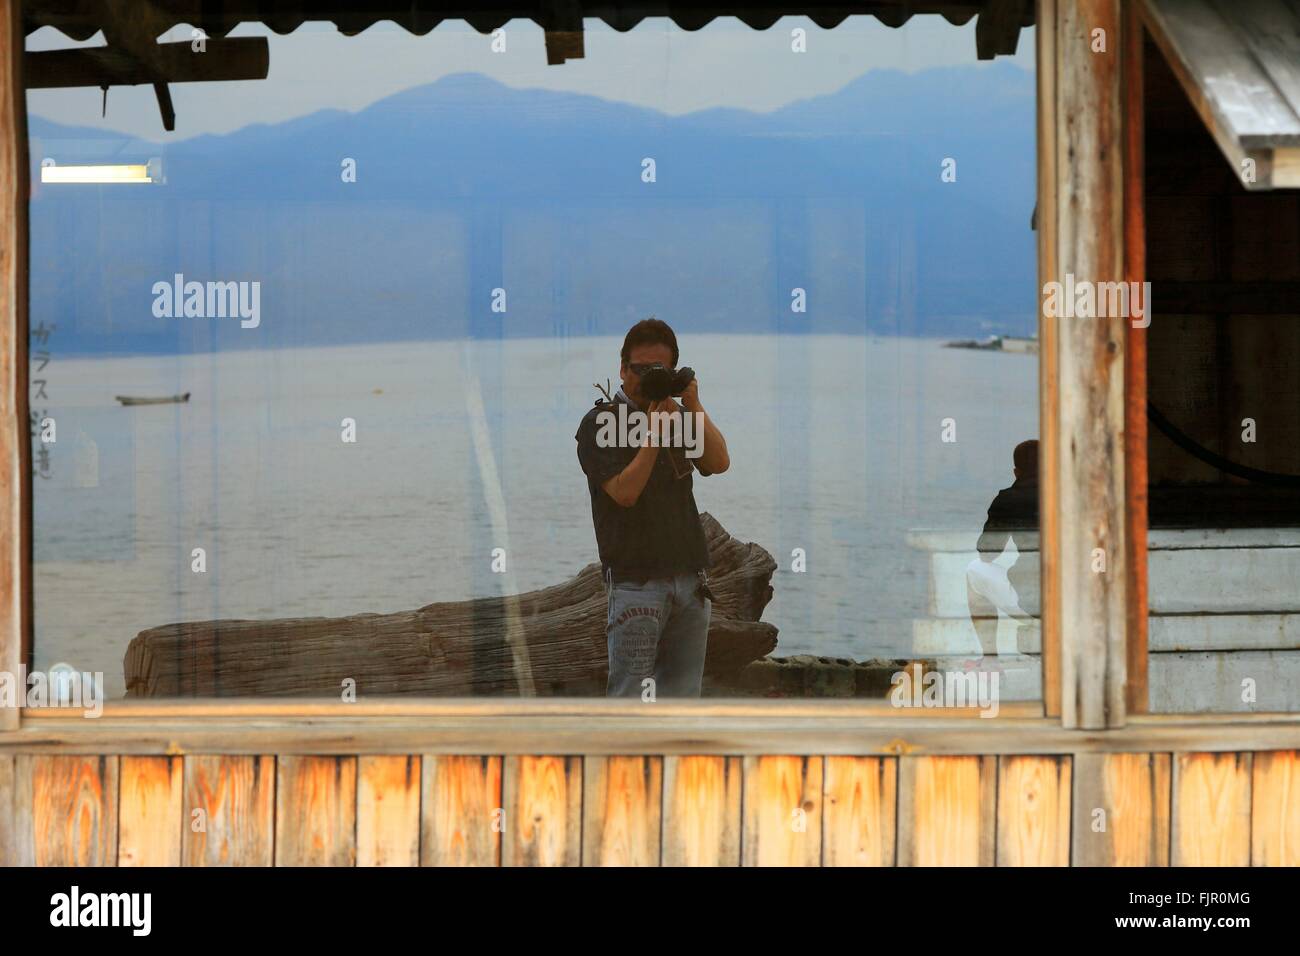 Man Photographing Self From Reflection On Glass Window Stock Photo